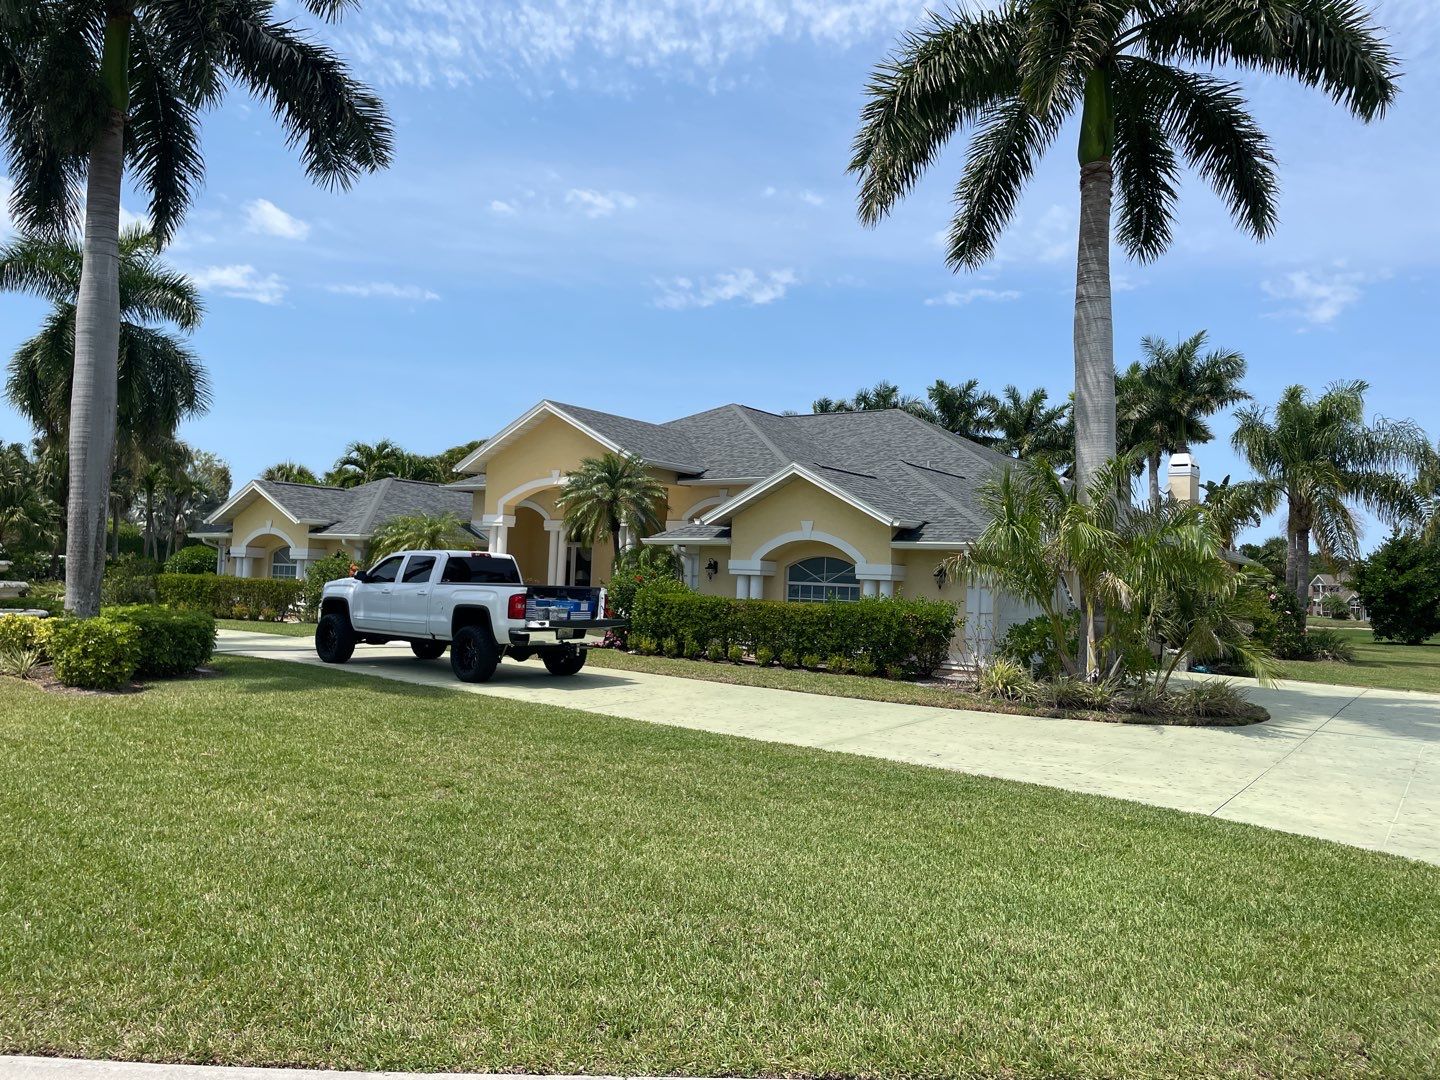 Local Roofing Company In North Fort Myers FL